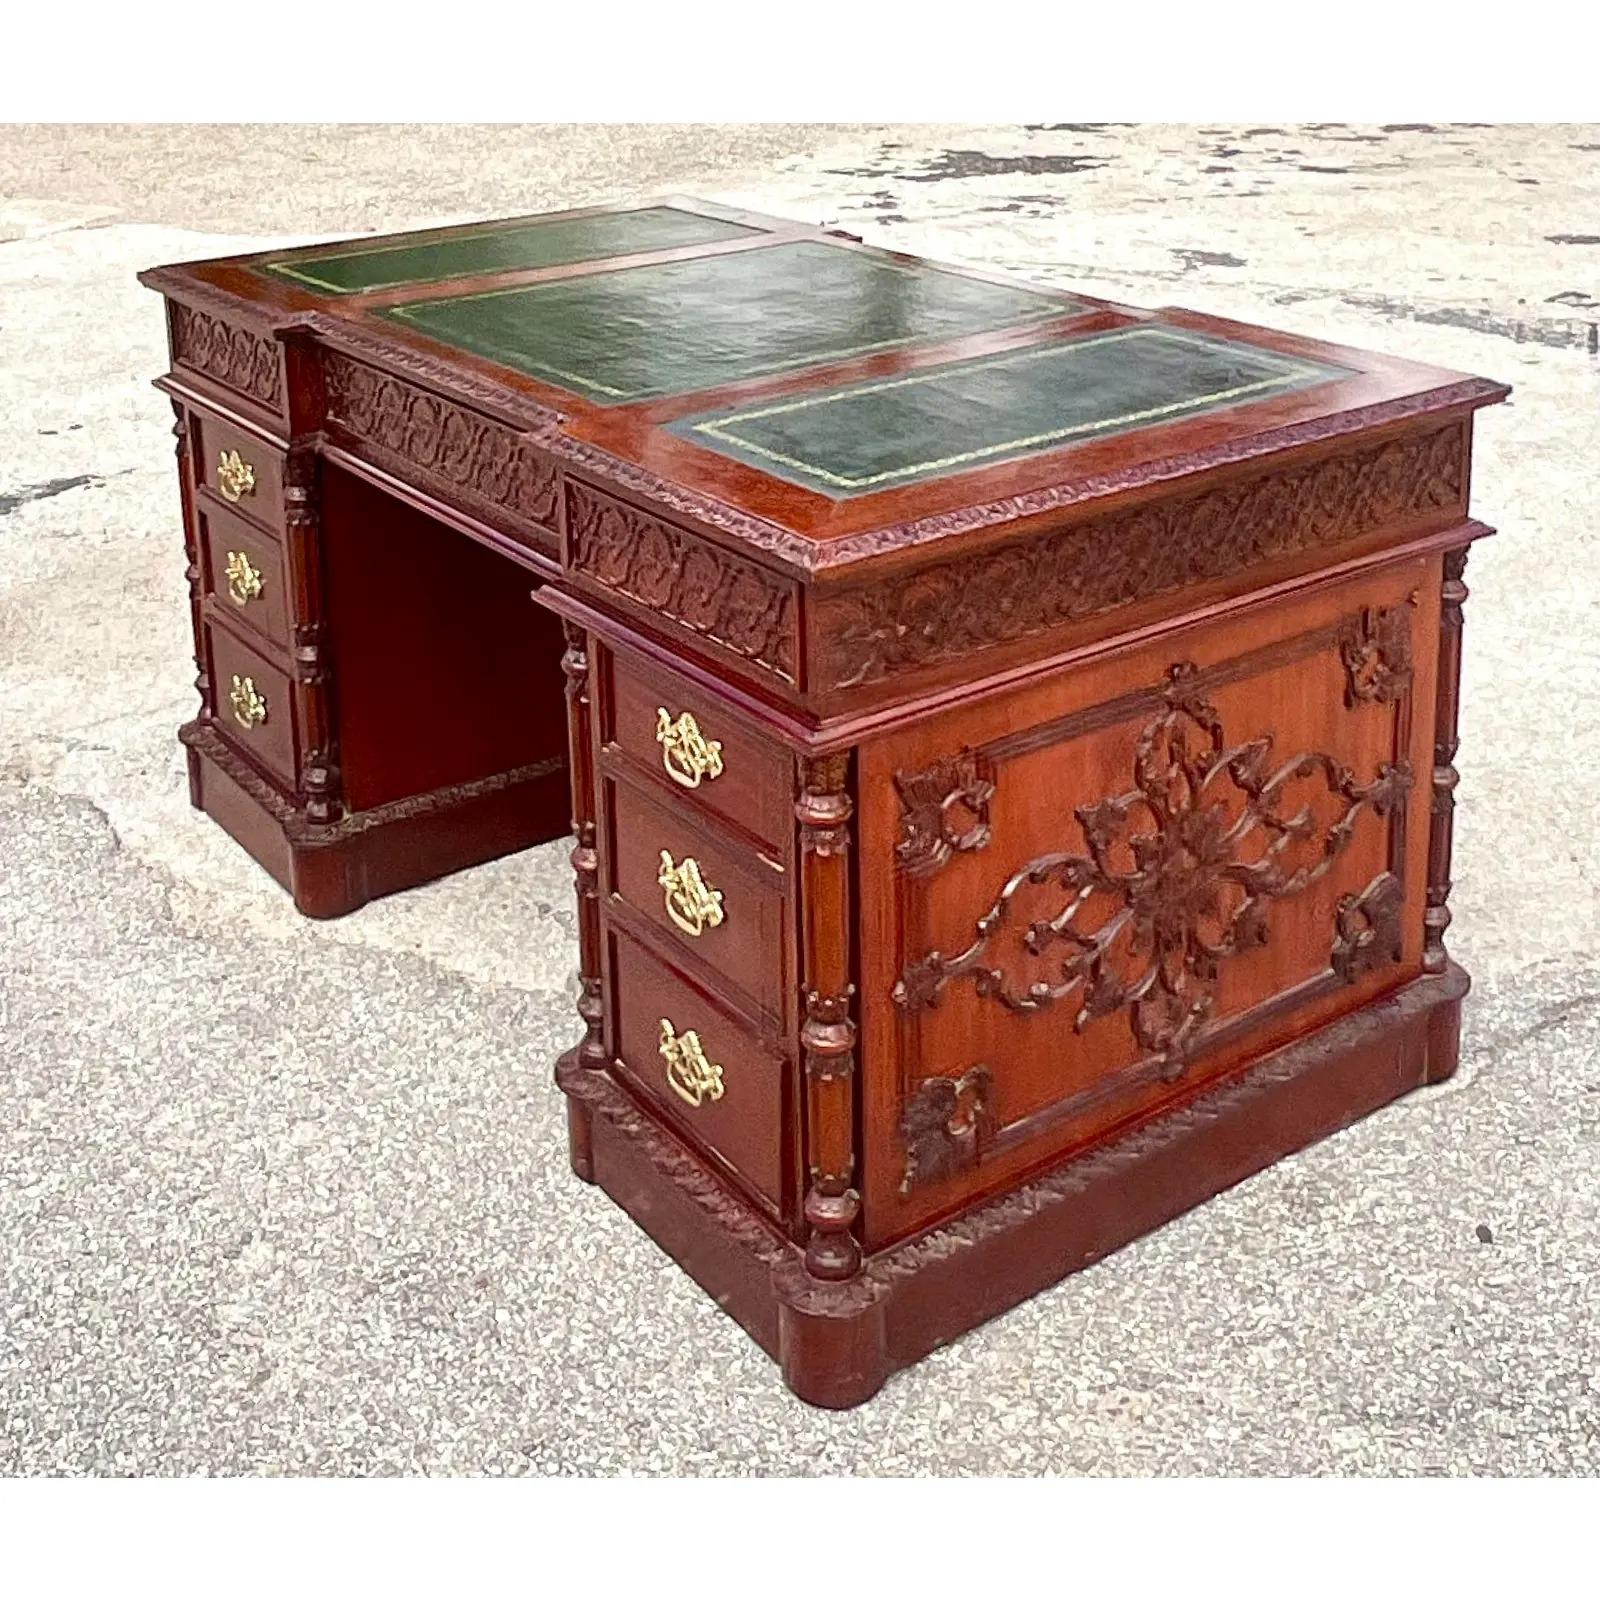 Fantastic vintage Regency Executive desk. Beautiful carved swag detail and embossed black leather top. Heavy brass hardware. Acquired from a Palm Beach estate.